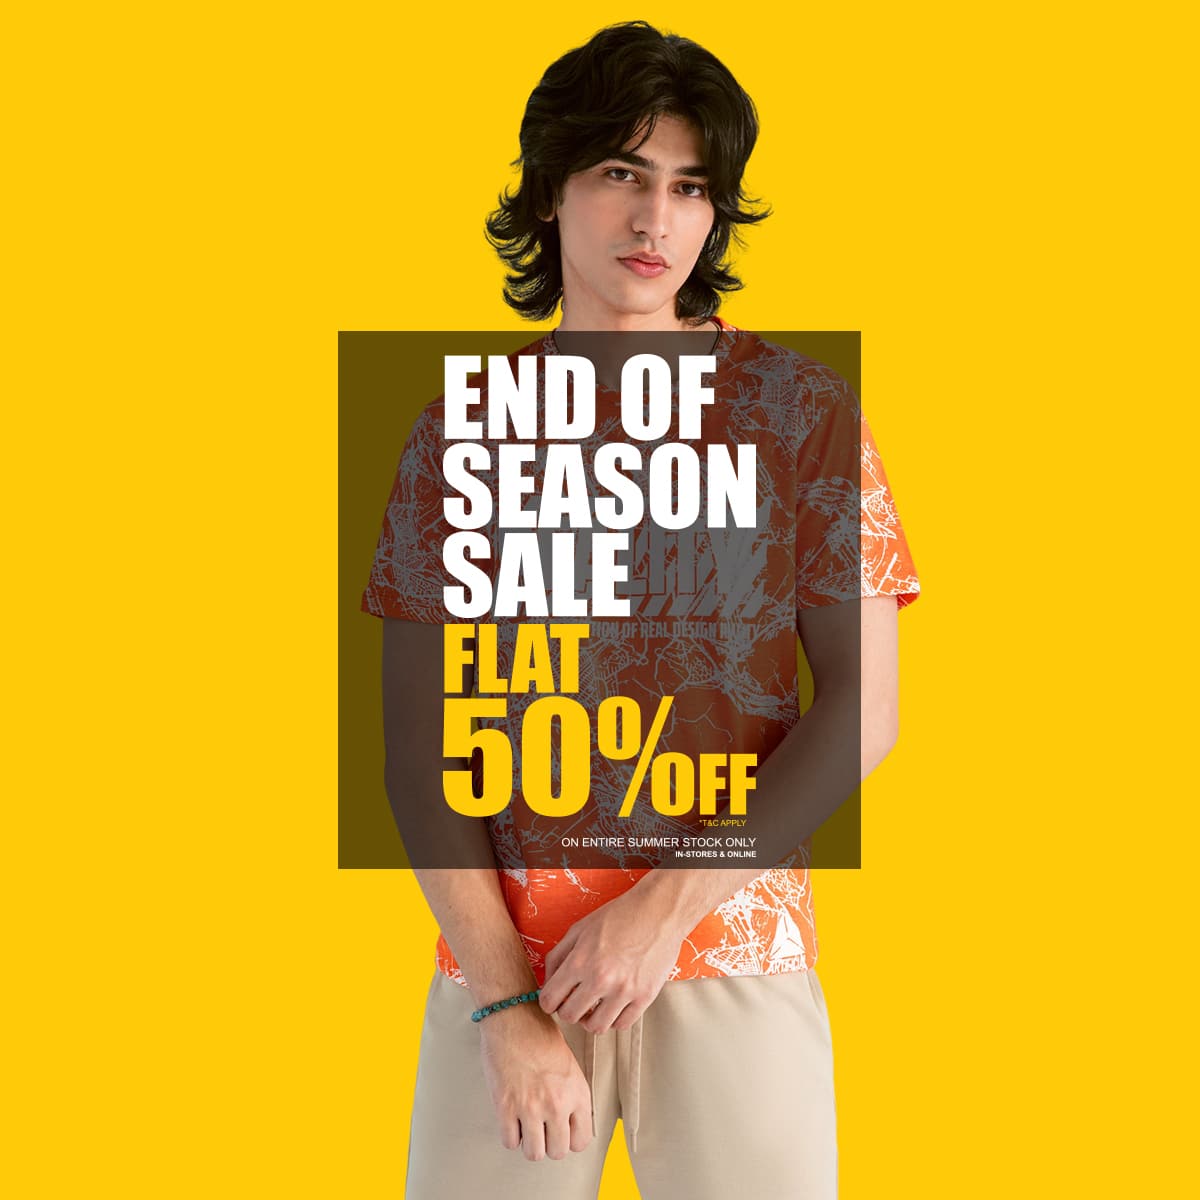 Ismail's end of season sale on boys collection